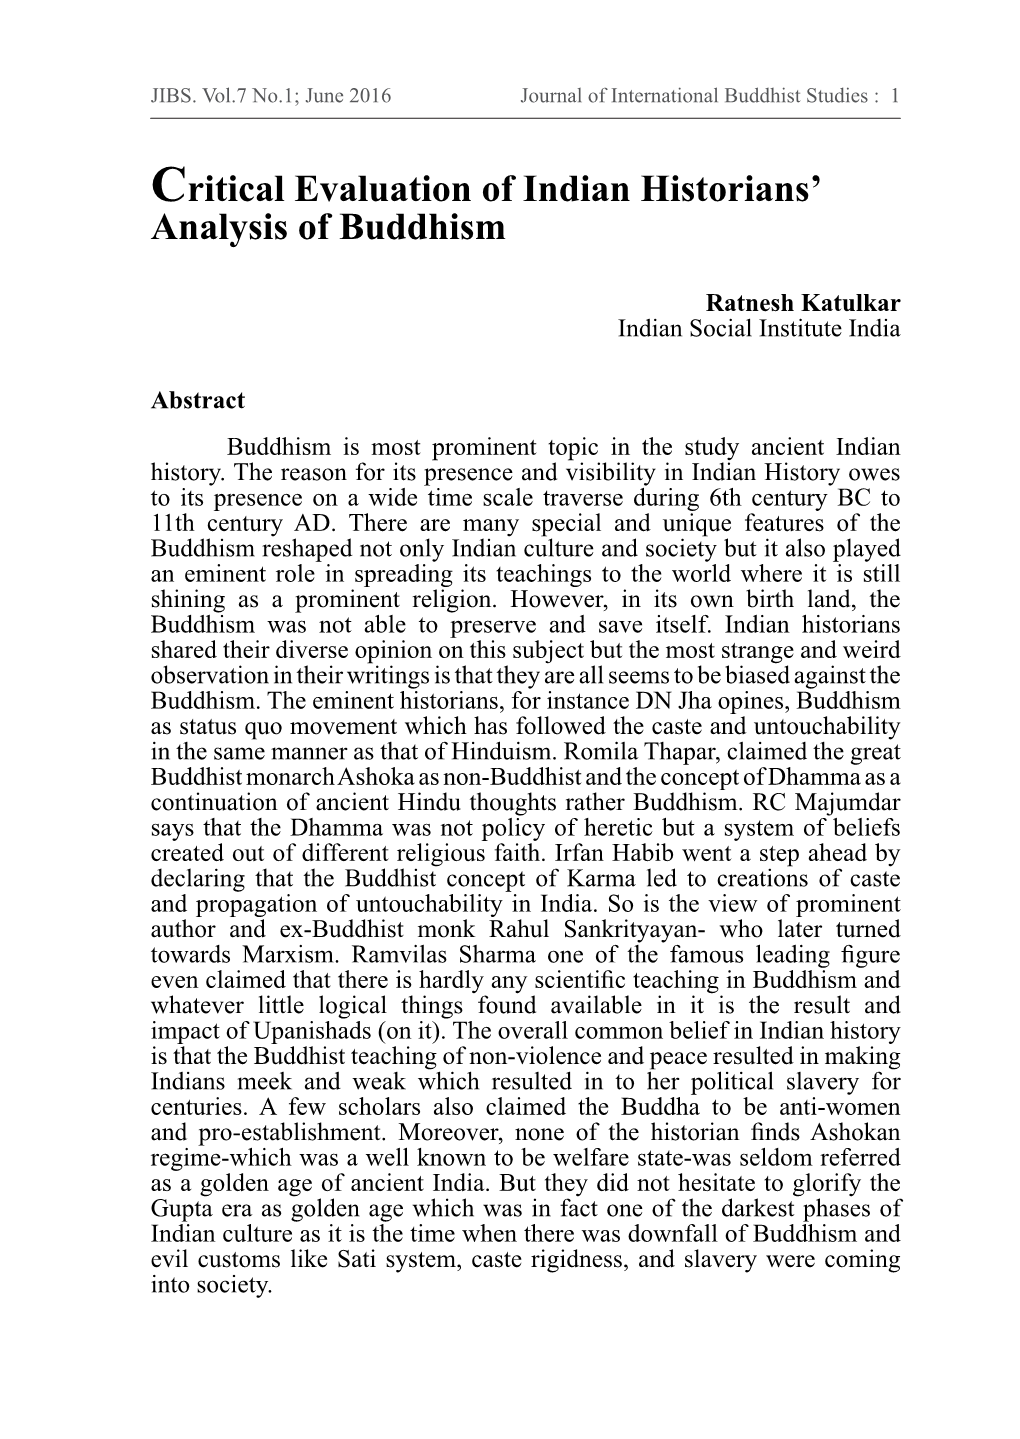 Critical Evaluation of Indian Historians' Analysis of Buddhism